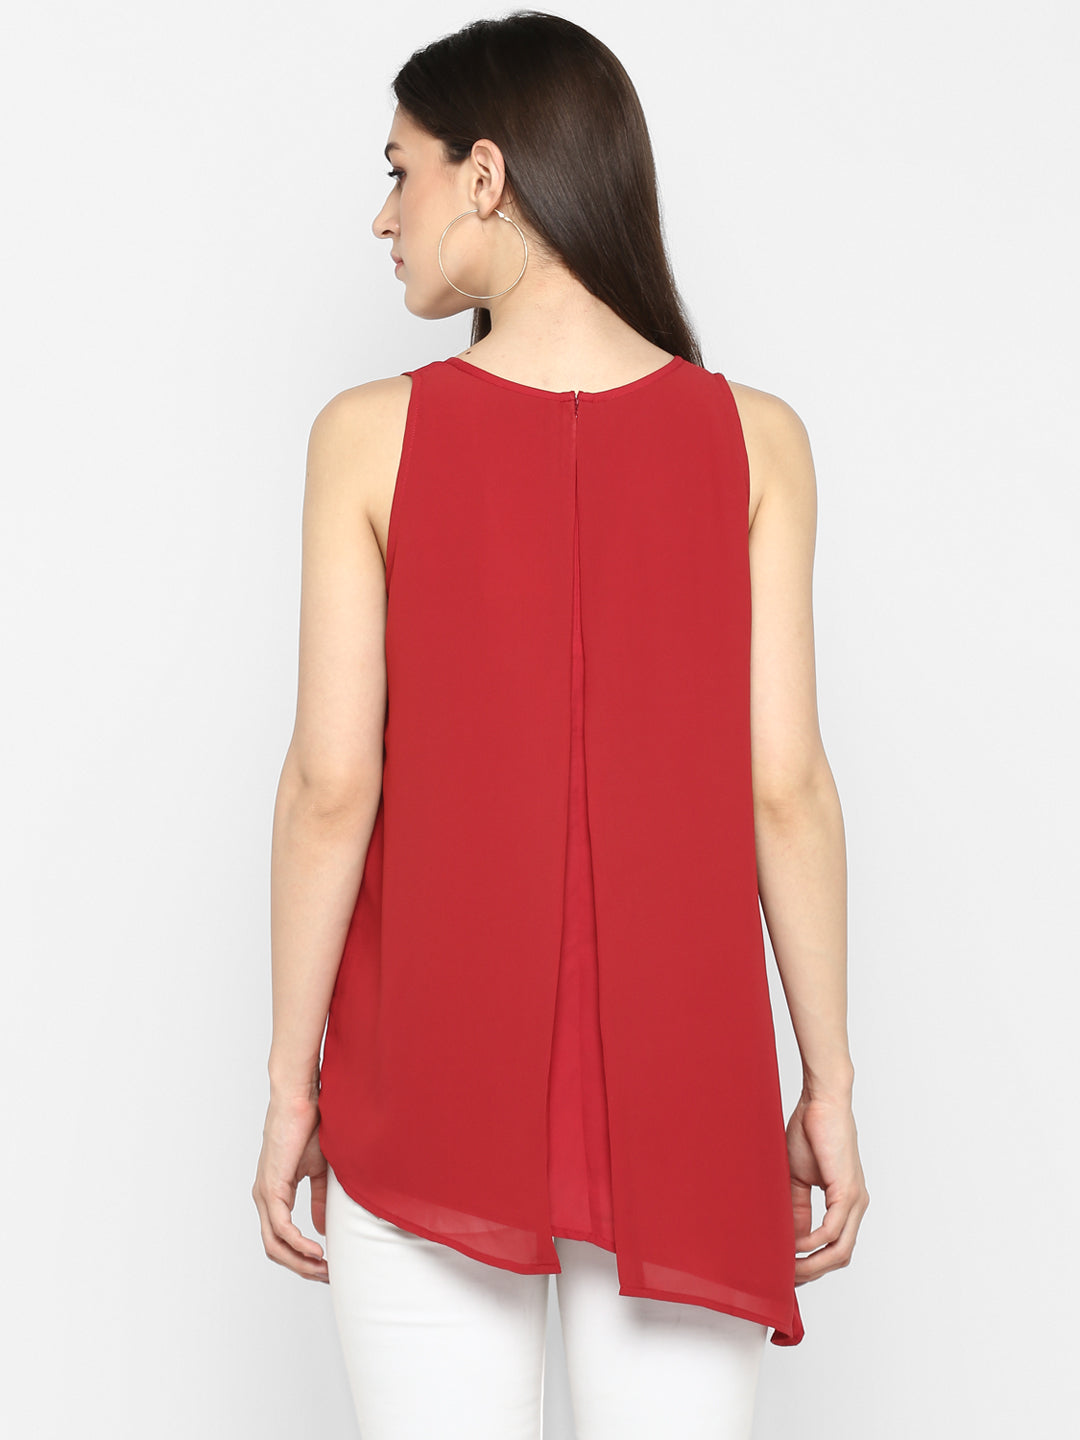 Red polyester sleeveless top